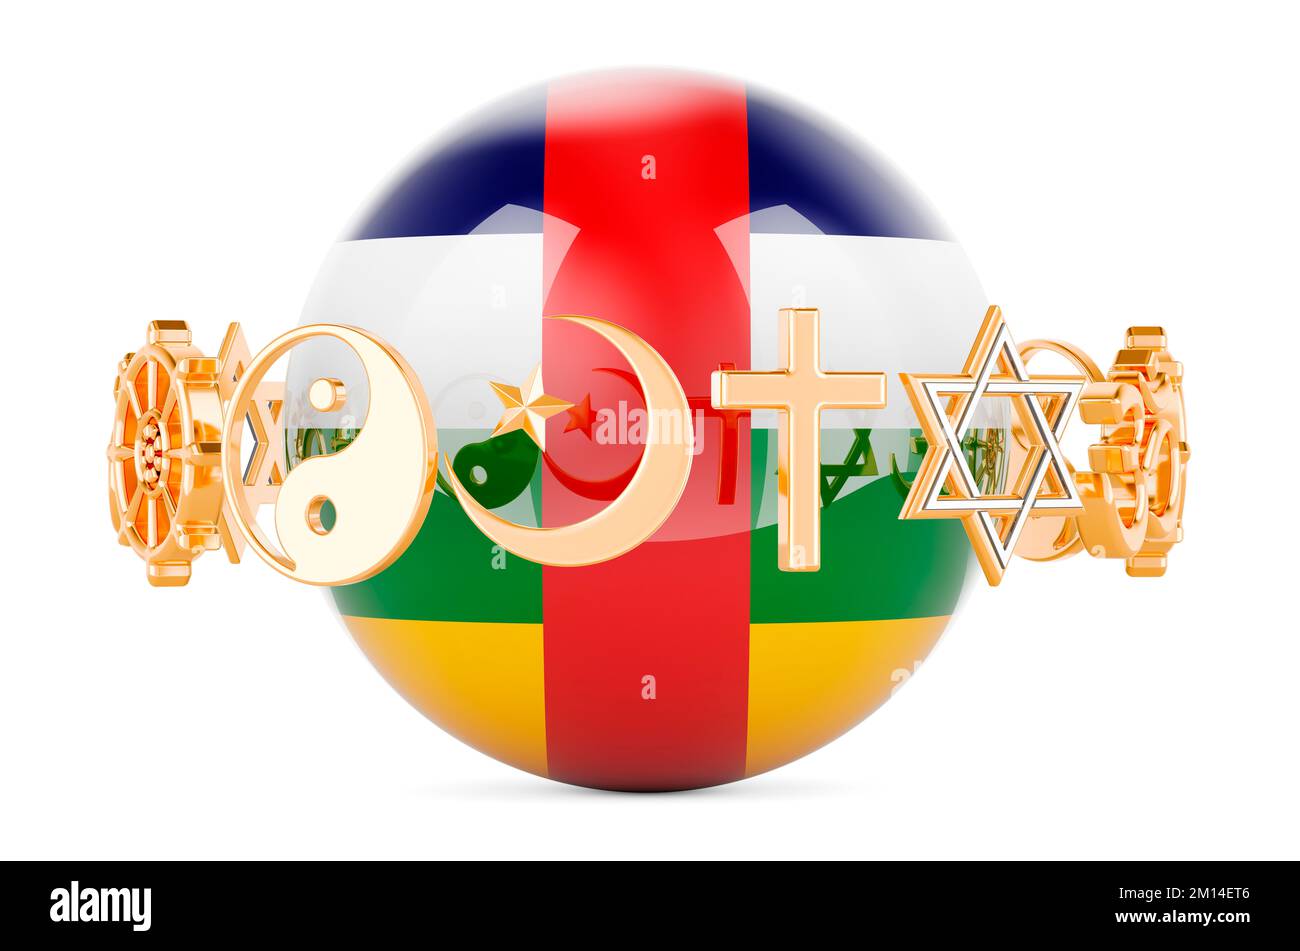 Central African Republic flag painted on sphere with religions symbols around, 3D rendering isolated on white background Stock Photo